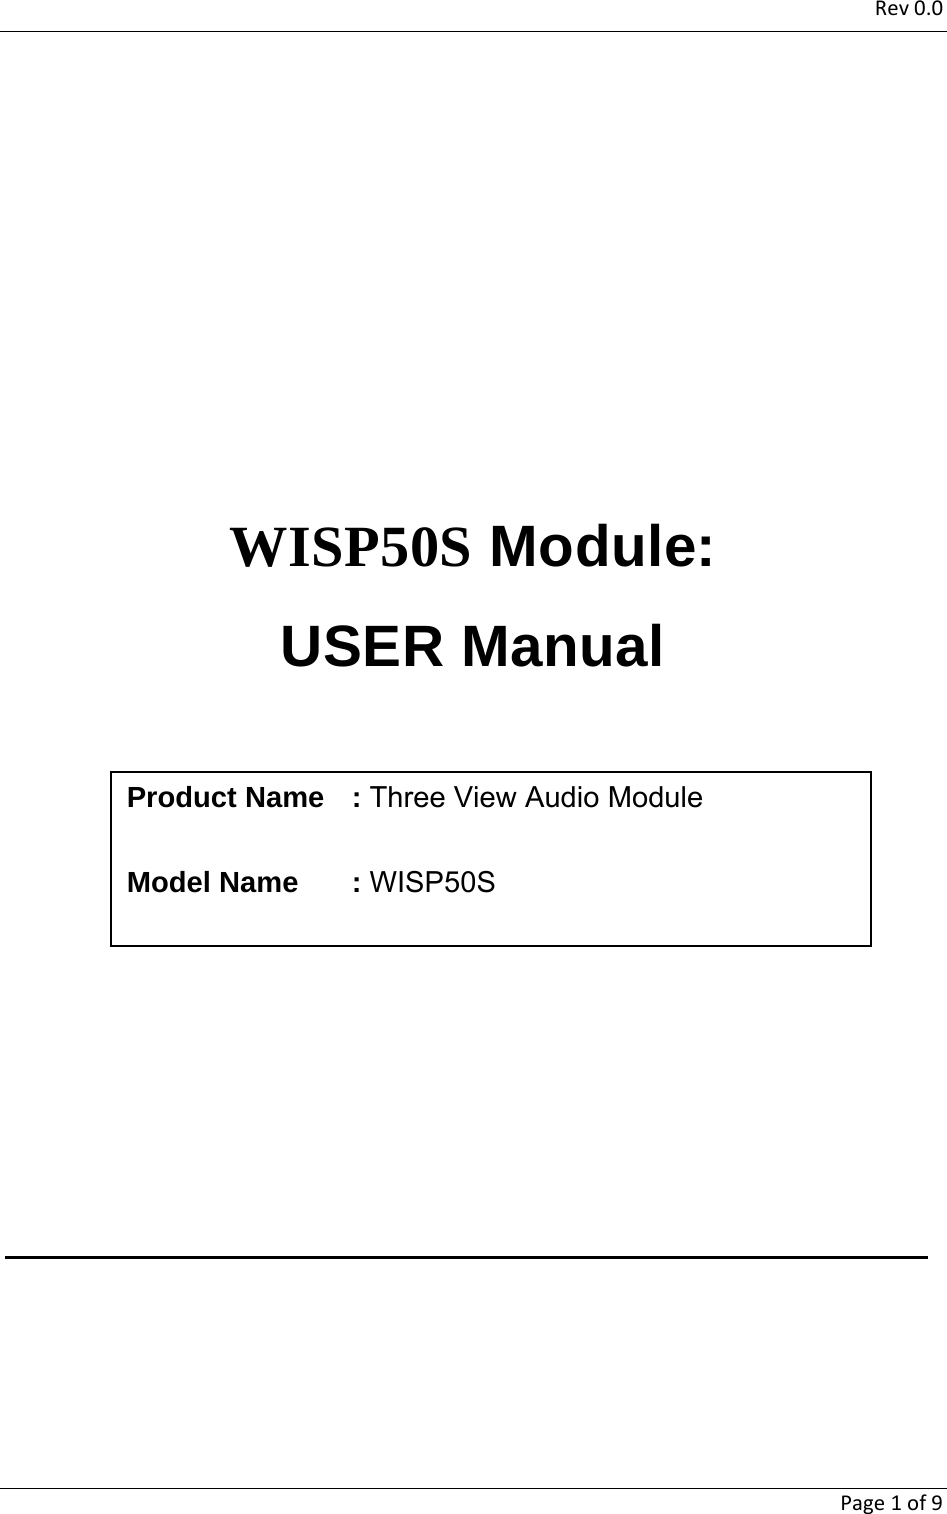 Rev0.0   Page1of9        WISP50S Module: USER Manual              Product Name  : Three View Audio Module  Model Name  : WISP50S 